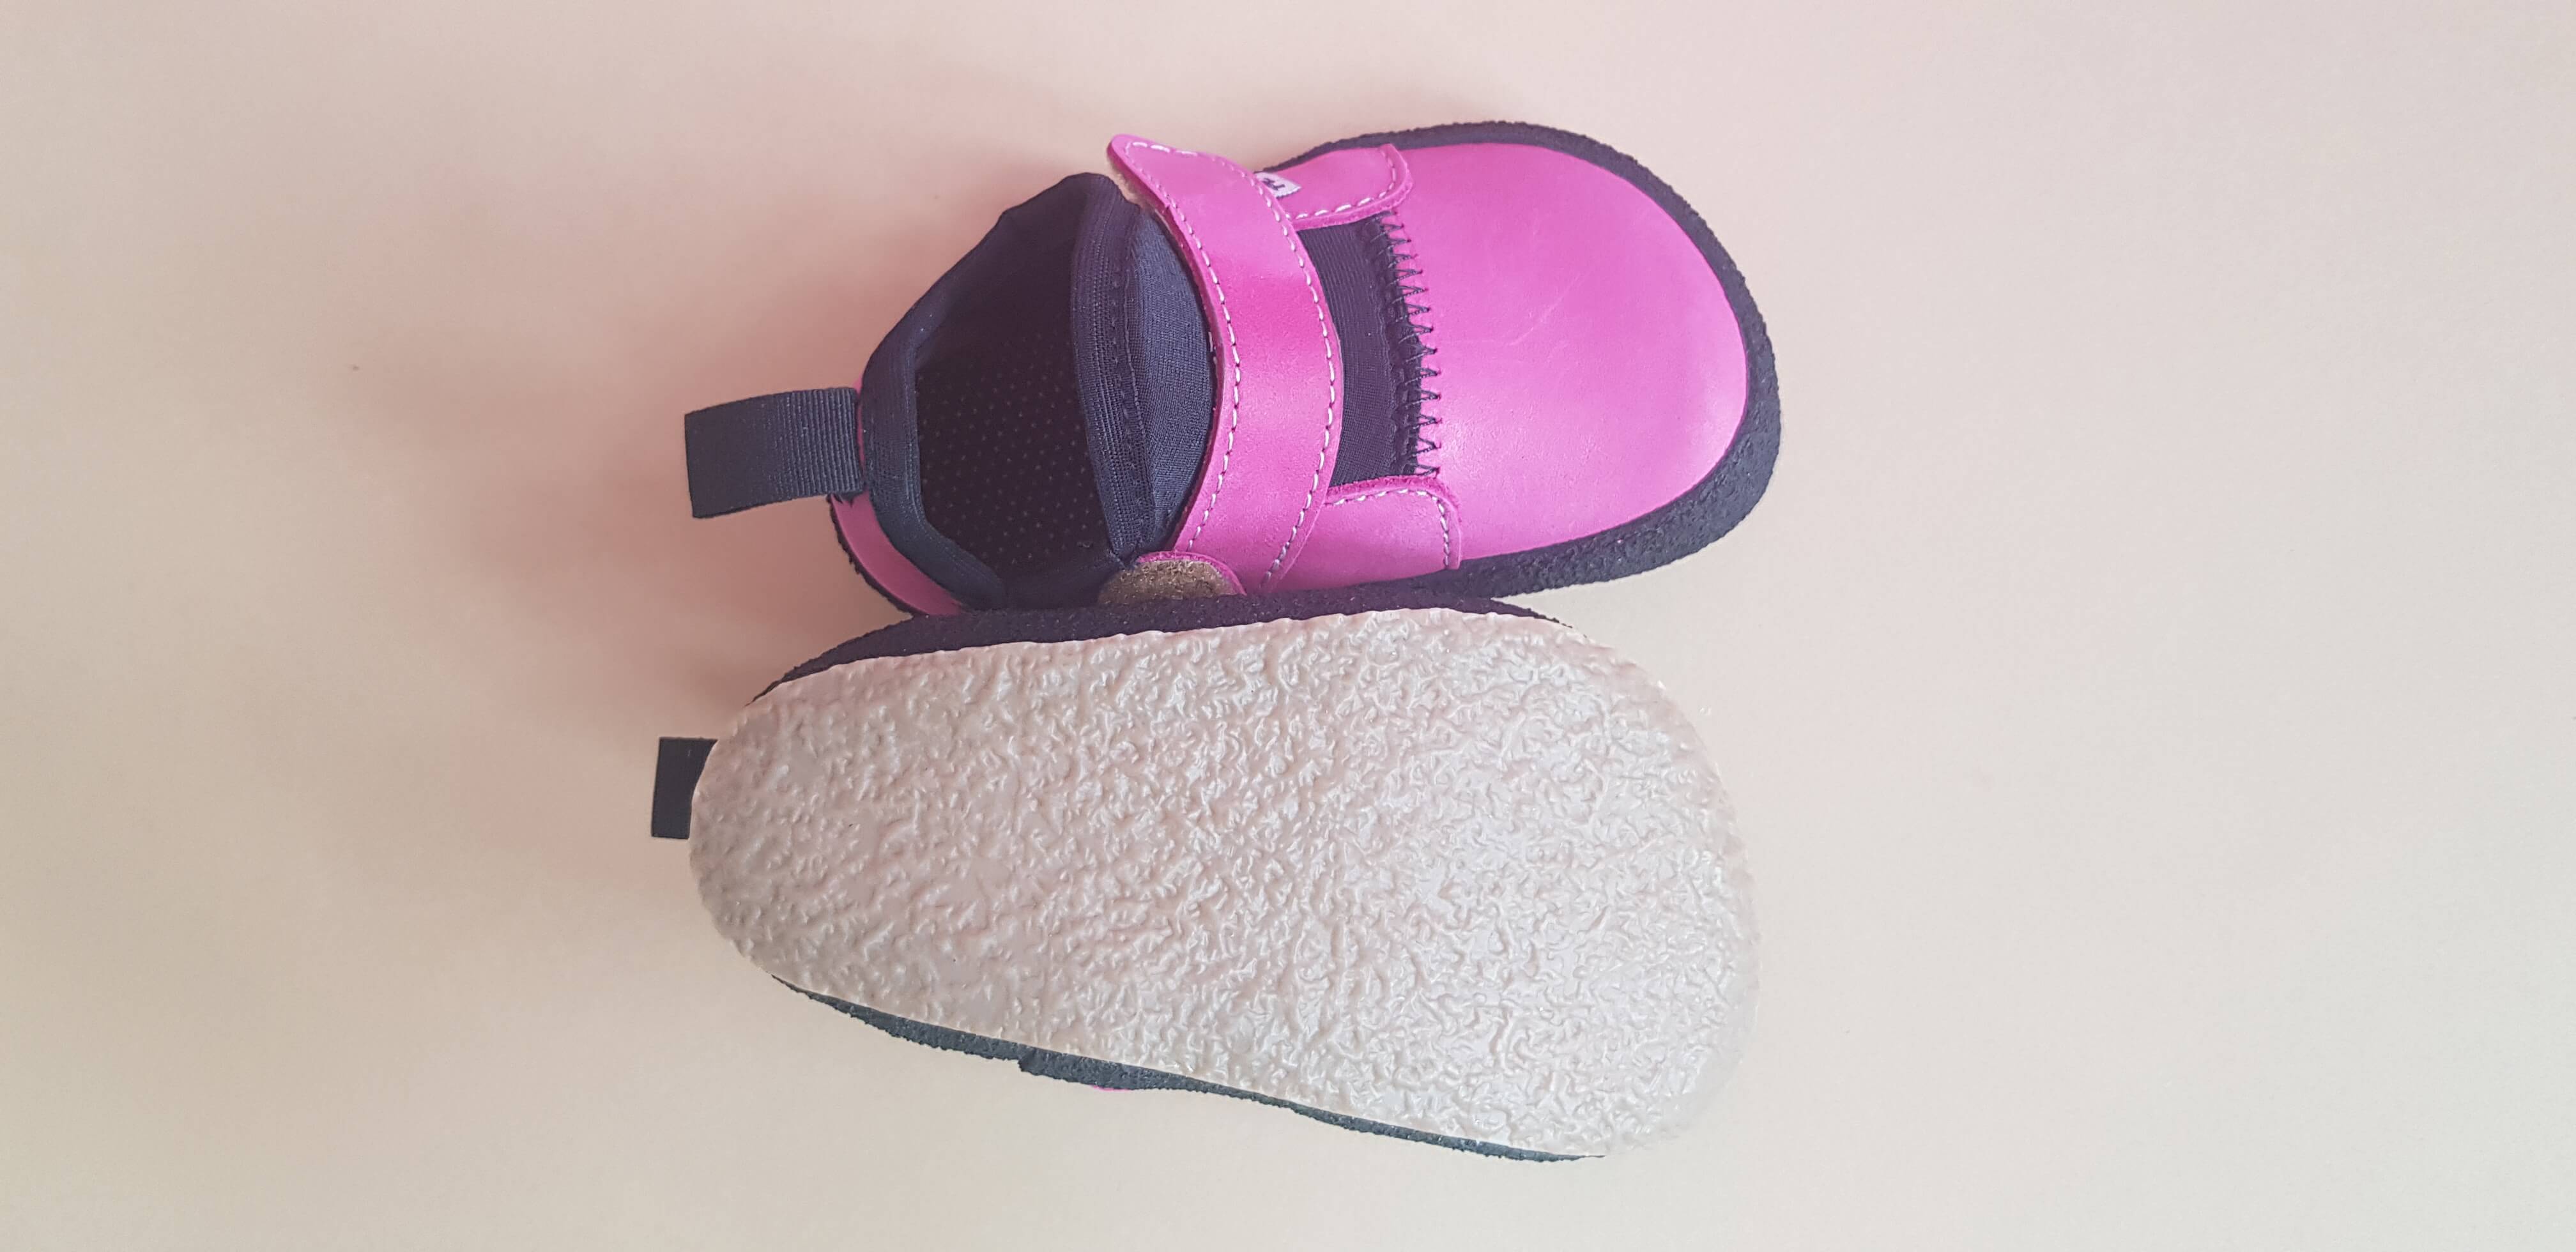 Barefoot Anatomically Shaped First Shoes - Pink and Black